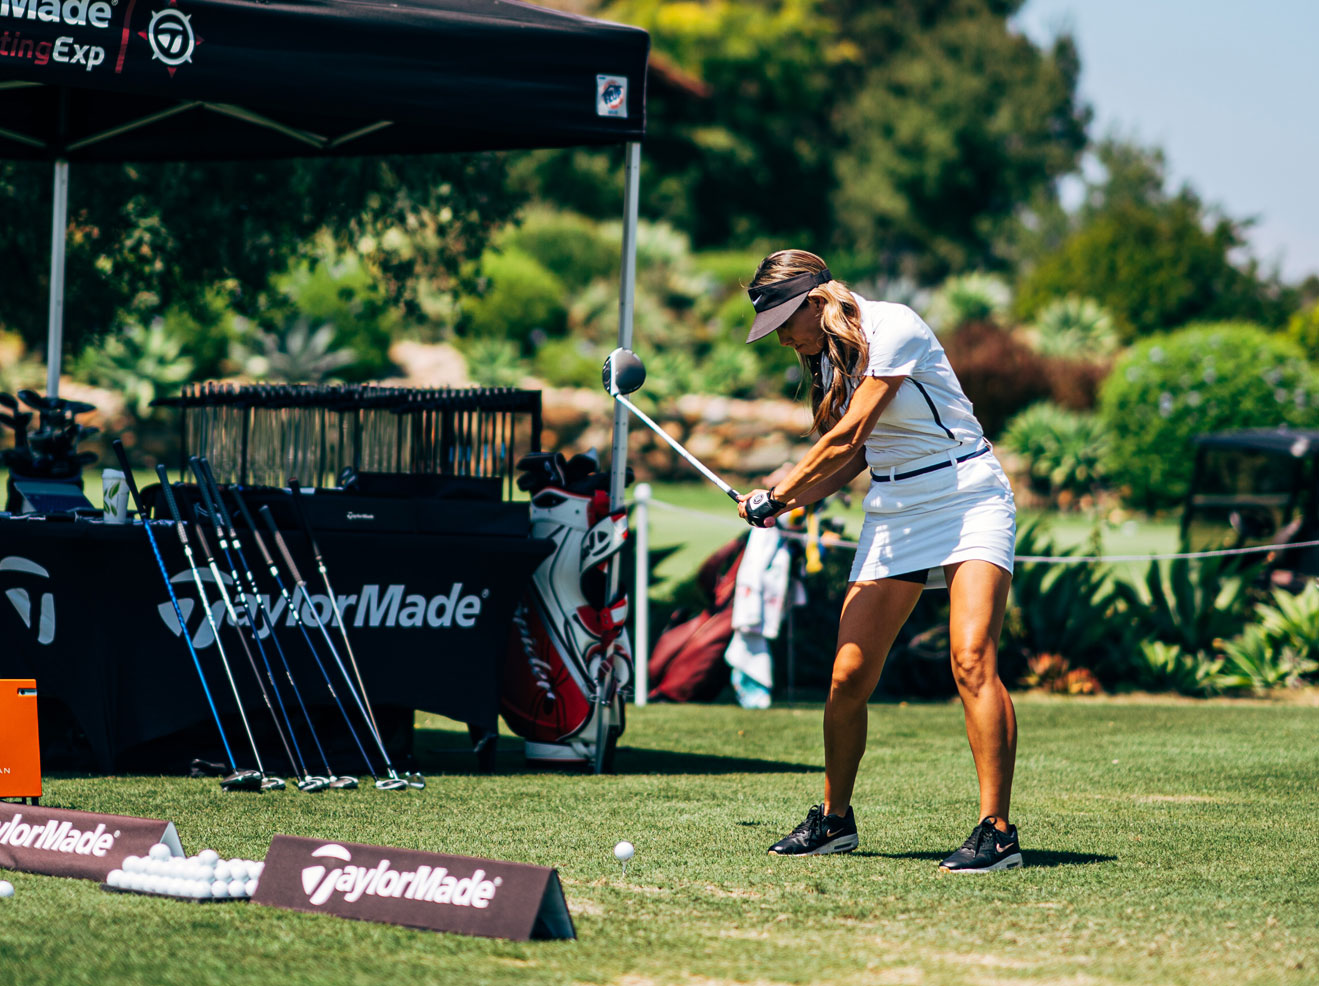 taylormade online fitting